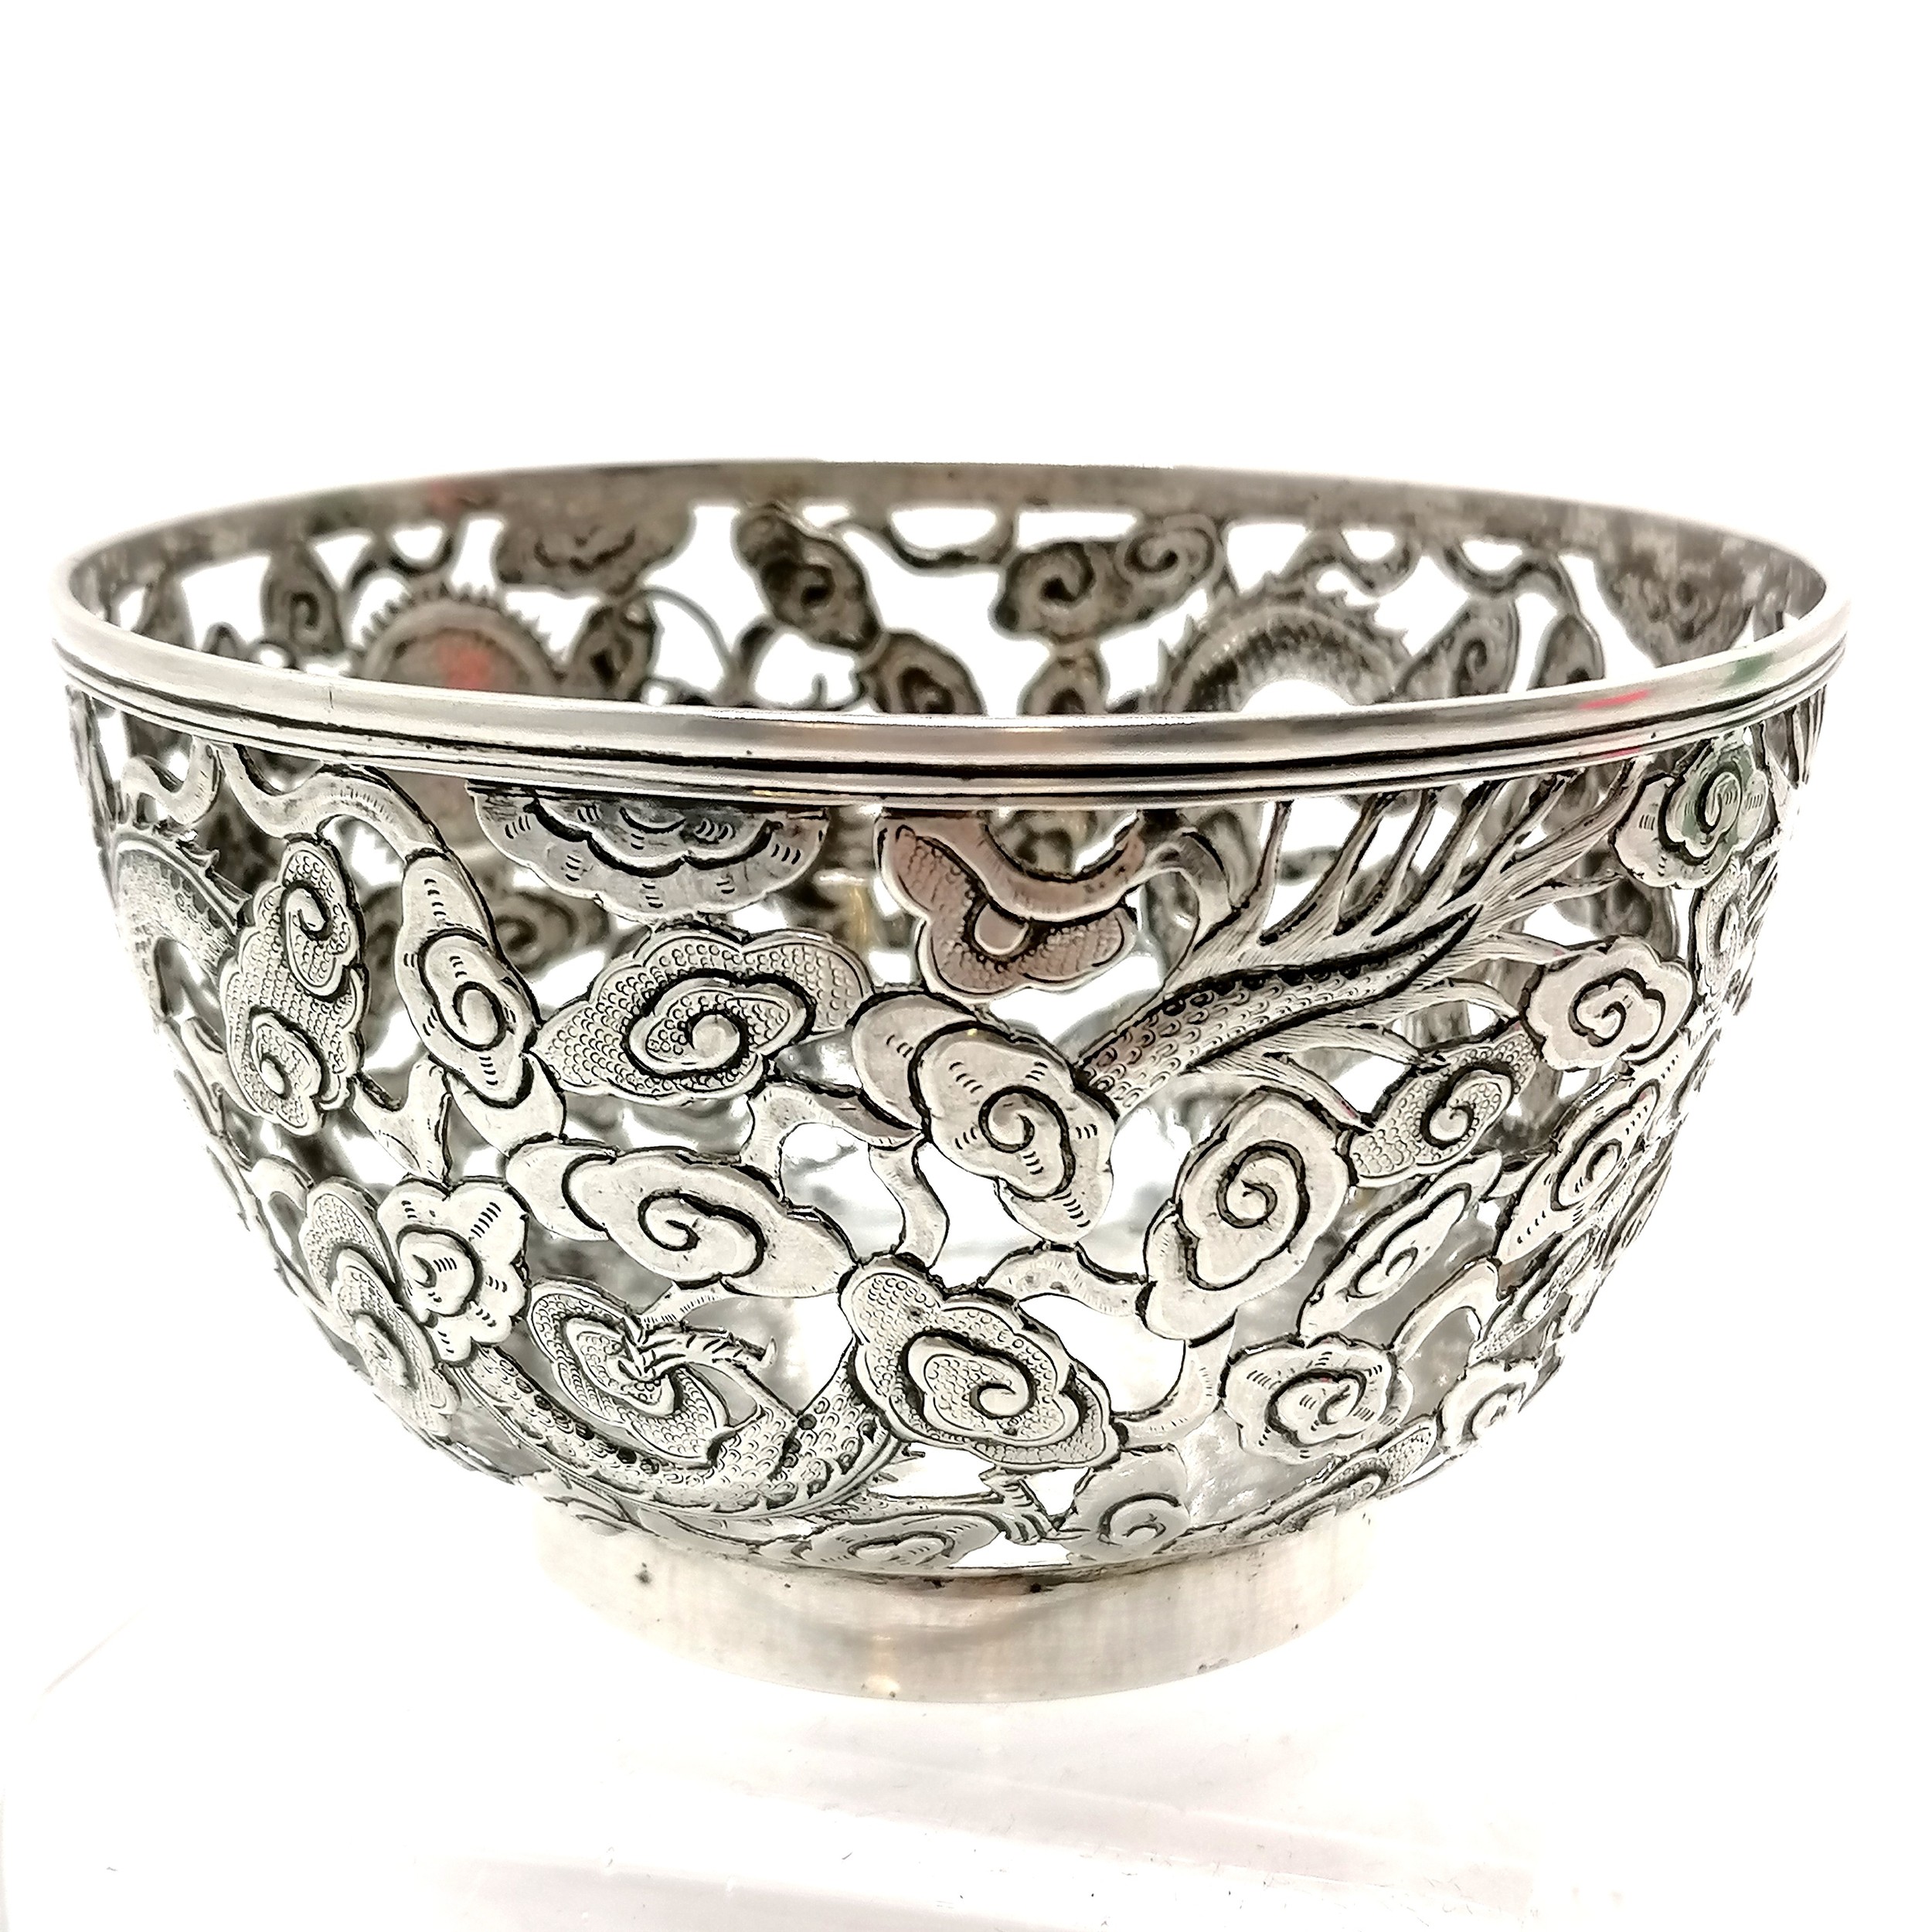 Chinese antique silver bowl with pierced decoration depicting 2 dragons & flaming pearl cartouche by - Image 5 of 6